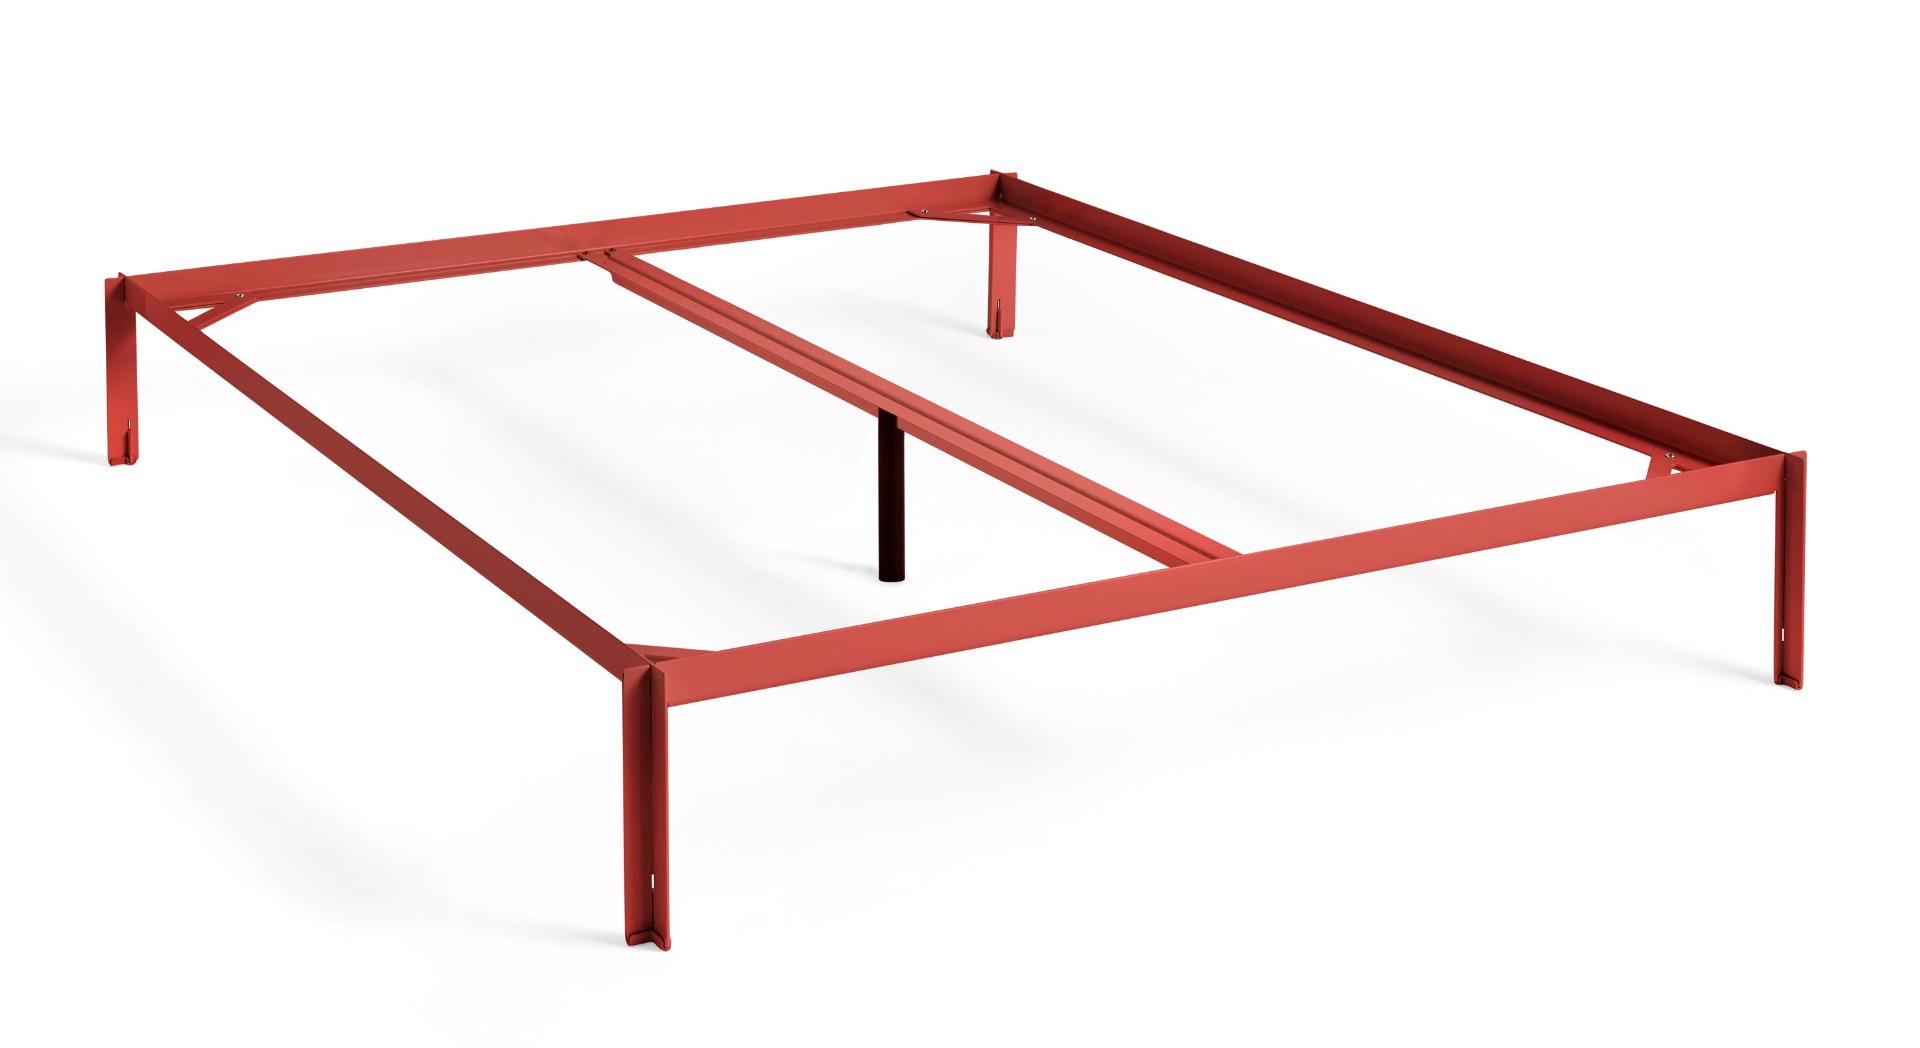 https://www.fundesign.nl/media/catalog/product/a/b/ab073-b560-ah36_connect_bed_w160xl200xh30_with_support_bar_maroon_red.jpg